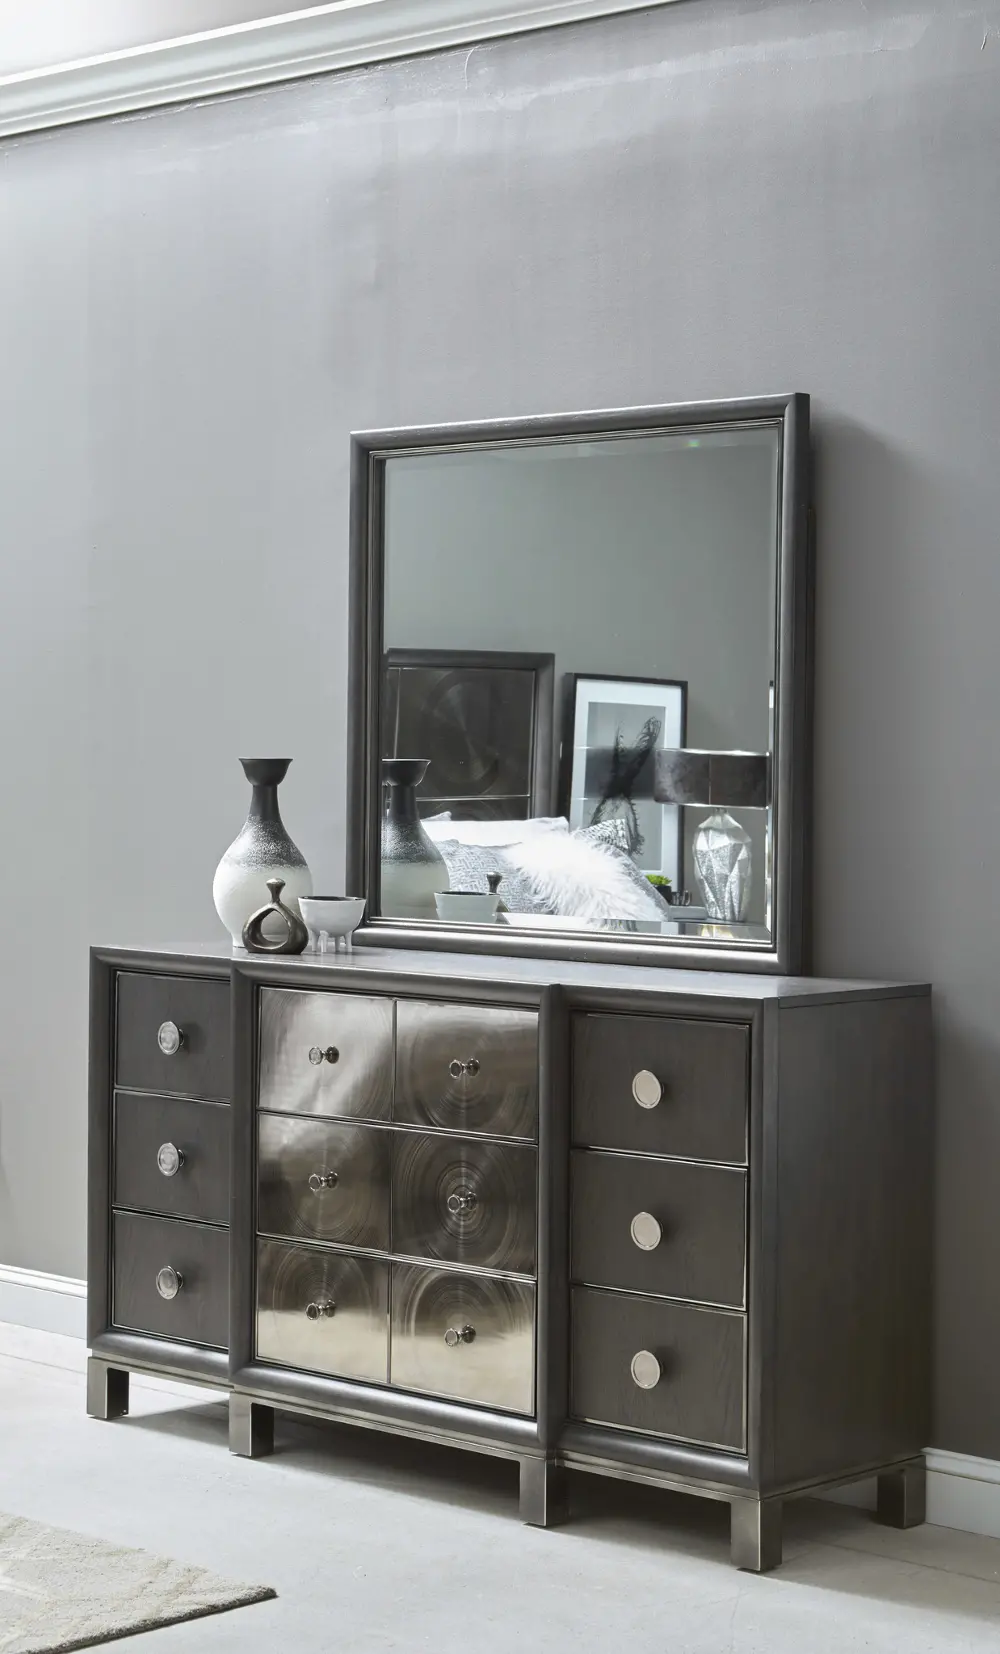 Contemporary Black and Nickel Dresser - Radiance Space-1